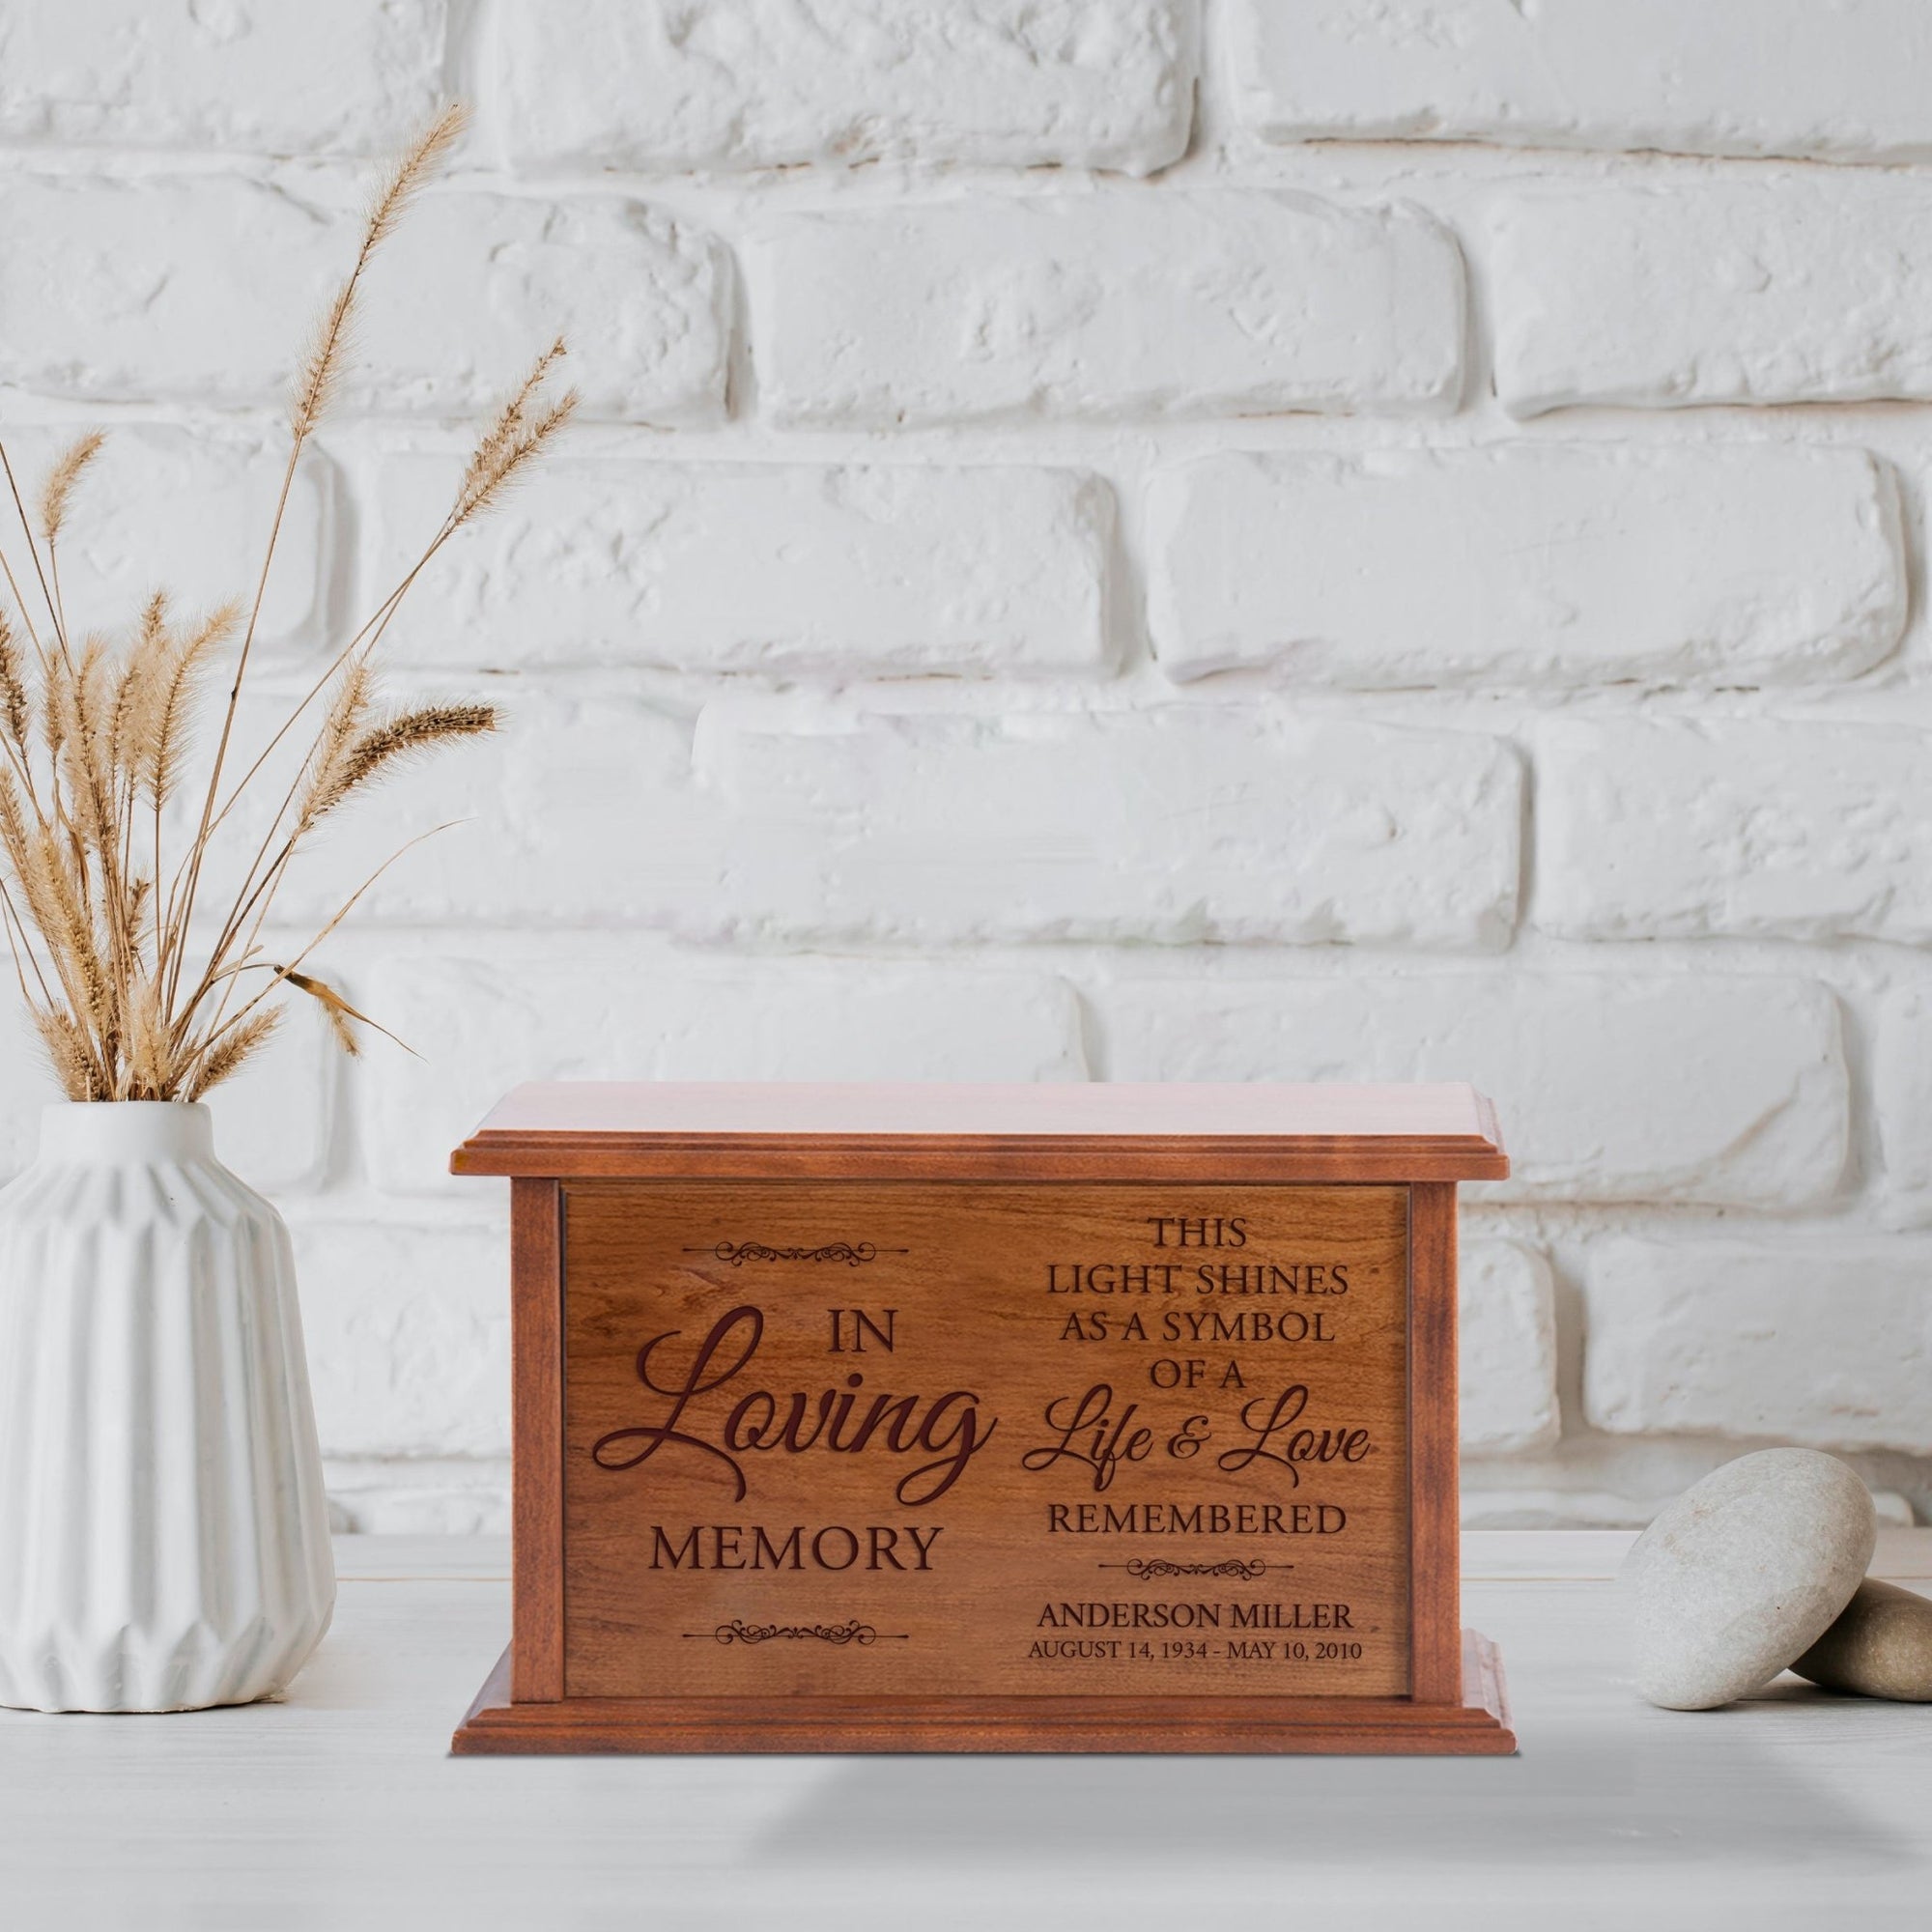 Custom Engraved Wooden Memorial Urns for Human Adult Ashes - In Loving Memory This Light